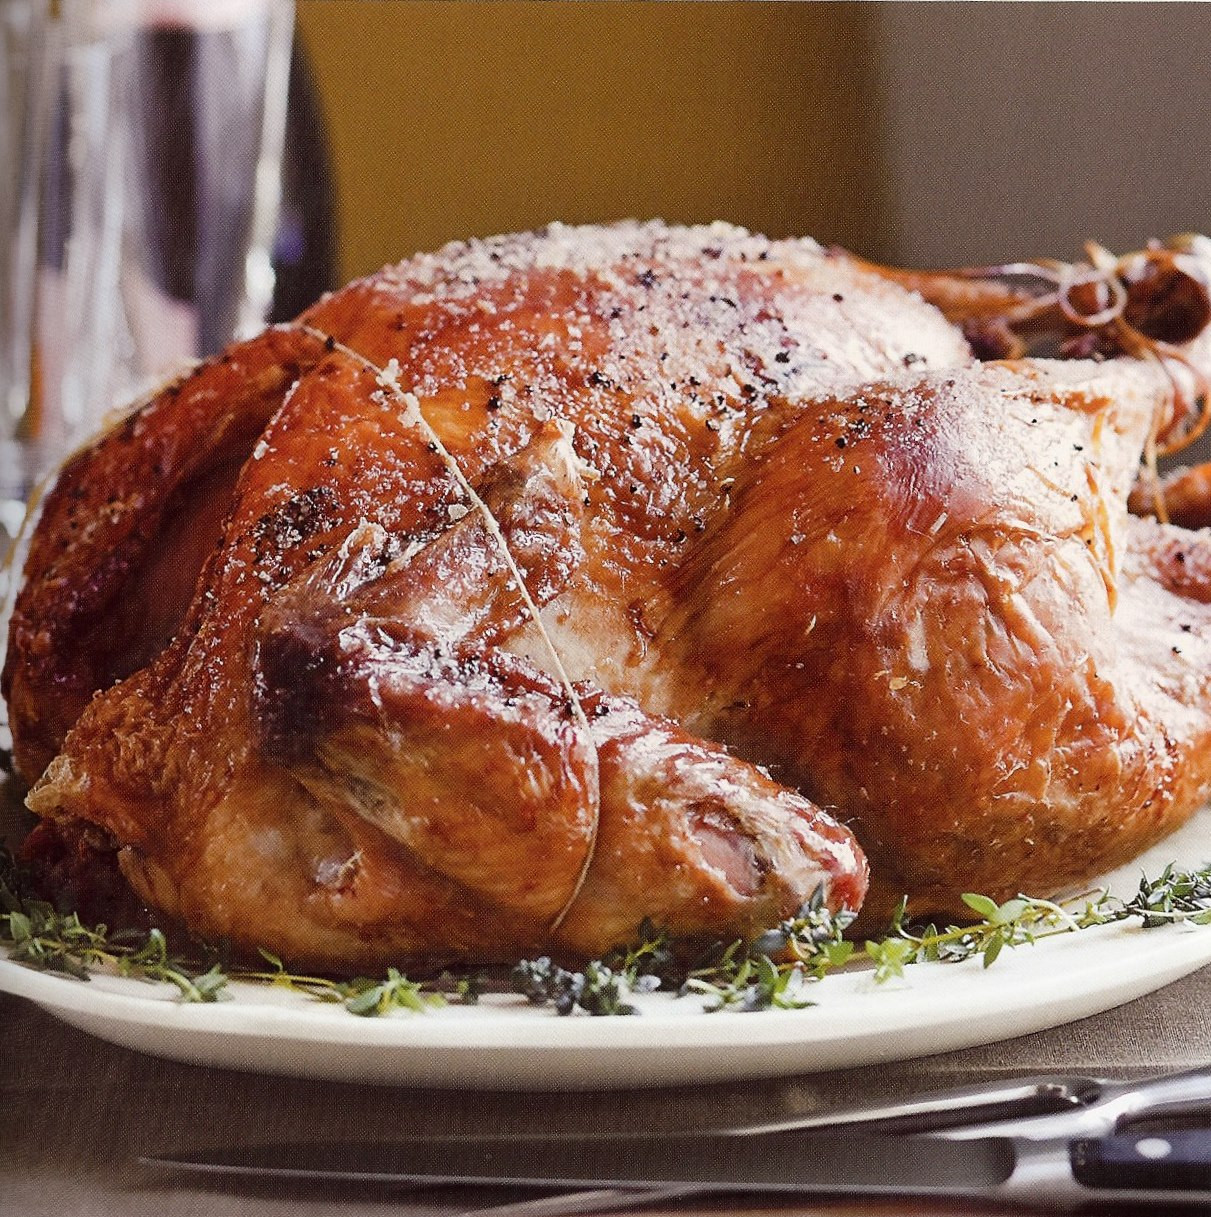 Barefoot Contessa Thanksgiving Turkey
 Circa Ina Garten s new cookbook just in time for